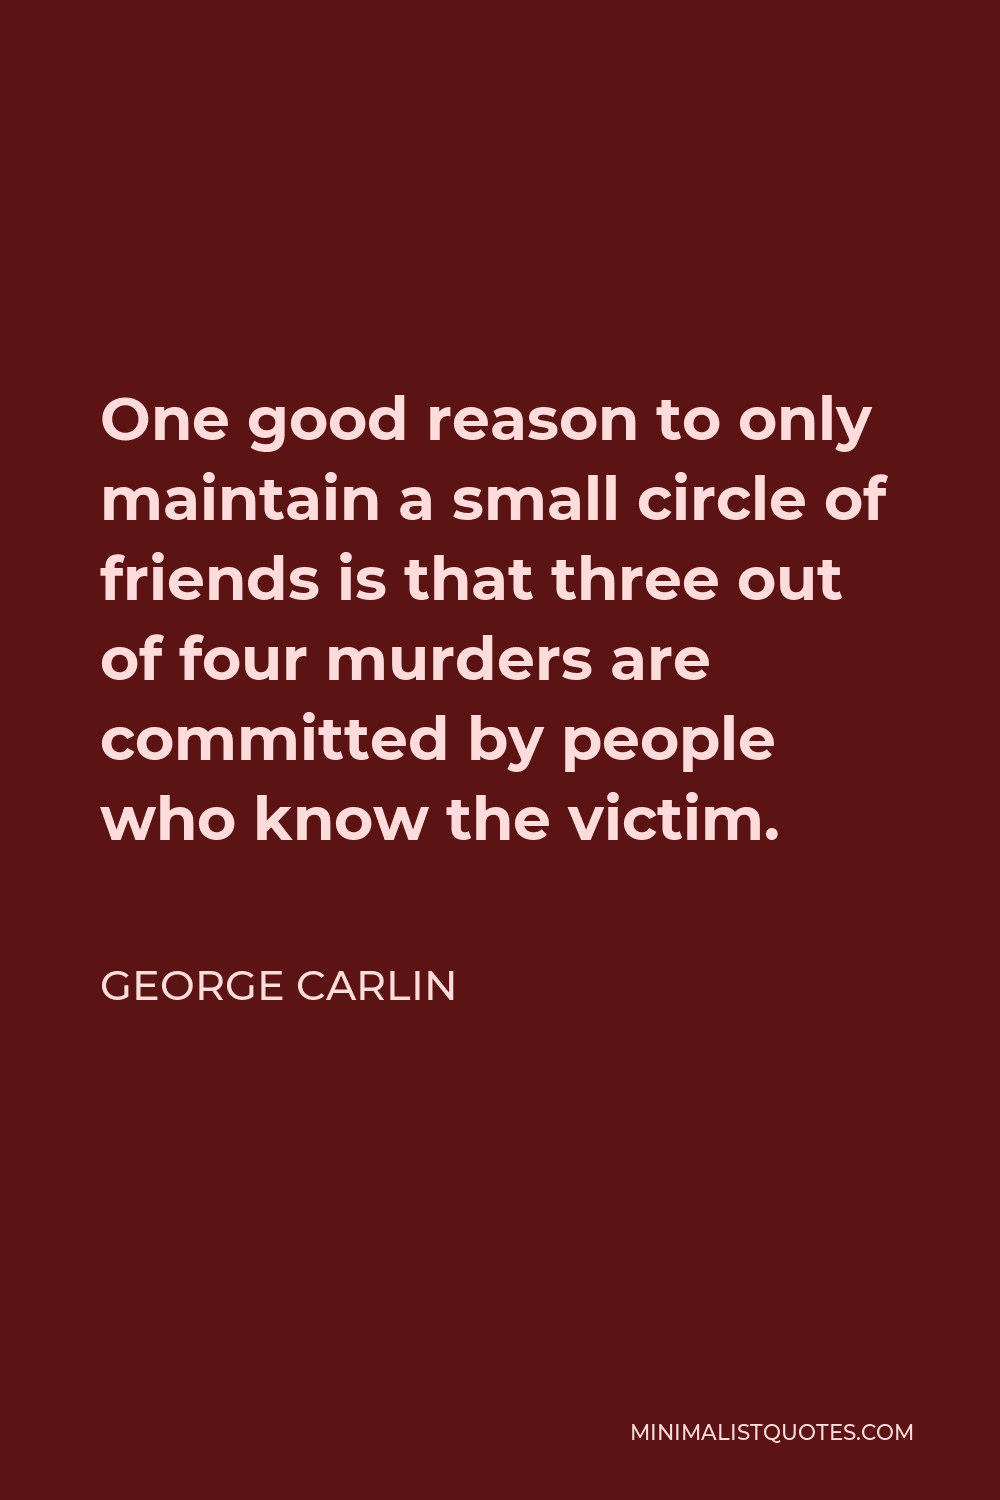 George Carlin Quote - One good reason to only maintain a small circle of friends is that three out of four murders are committed by people who know the victim.